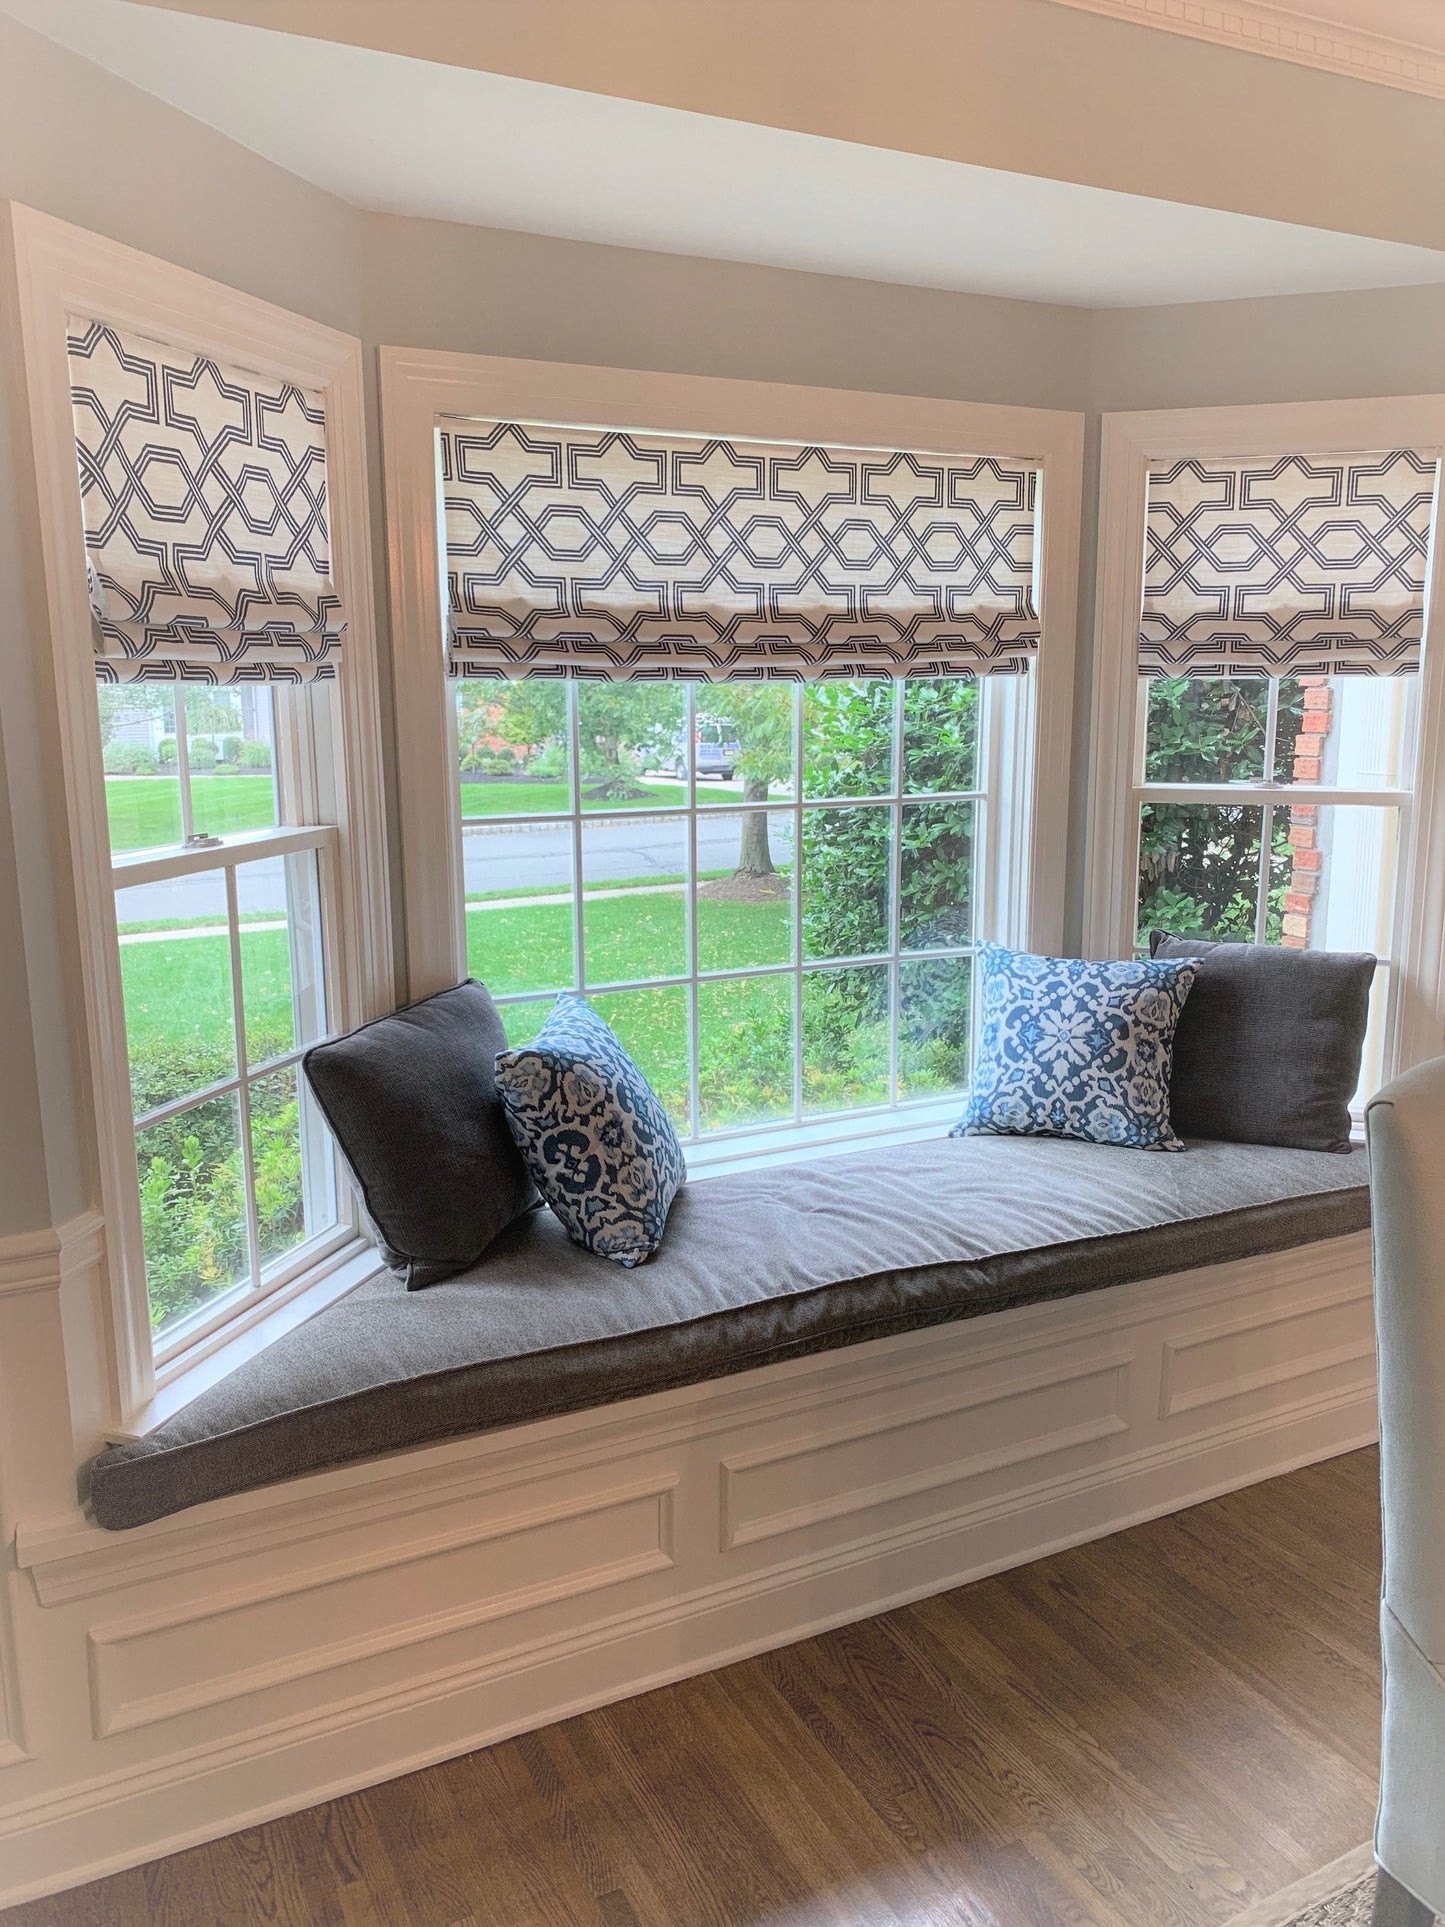 Faux Roman Shade Valance, Ander Blue, Graphite Grey or Pewter & White Print on Premium Cotton Linen, Custom Made Fully Lined Bay Window